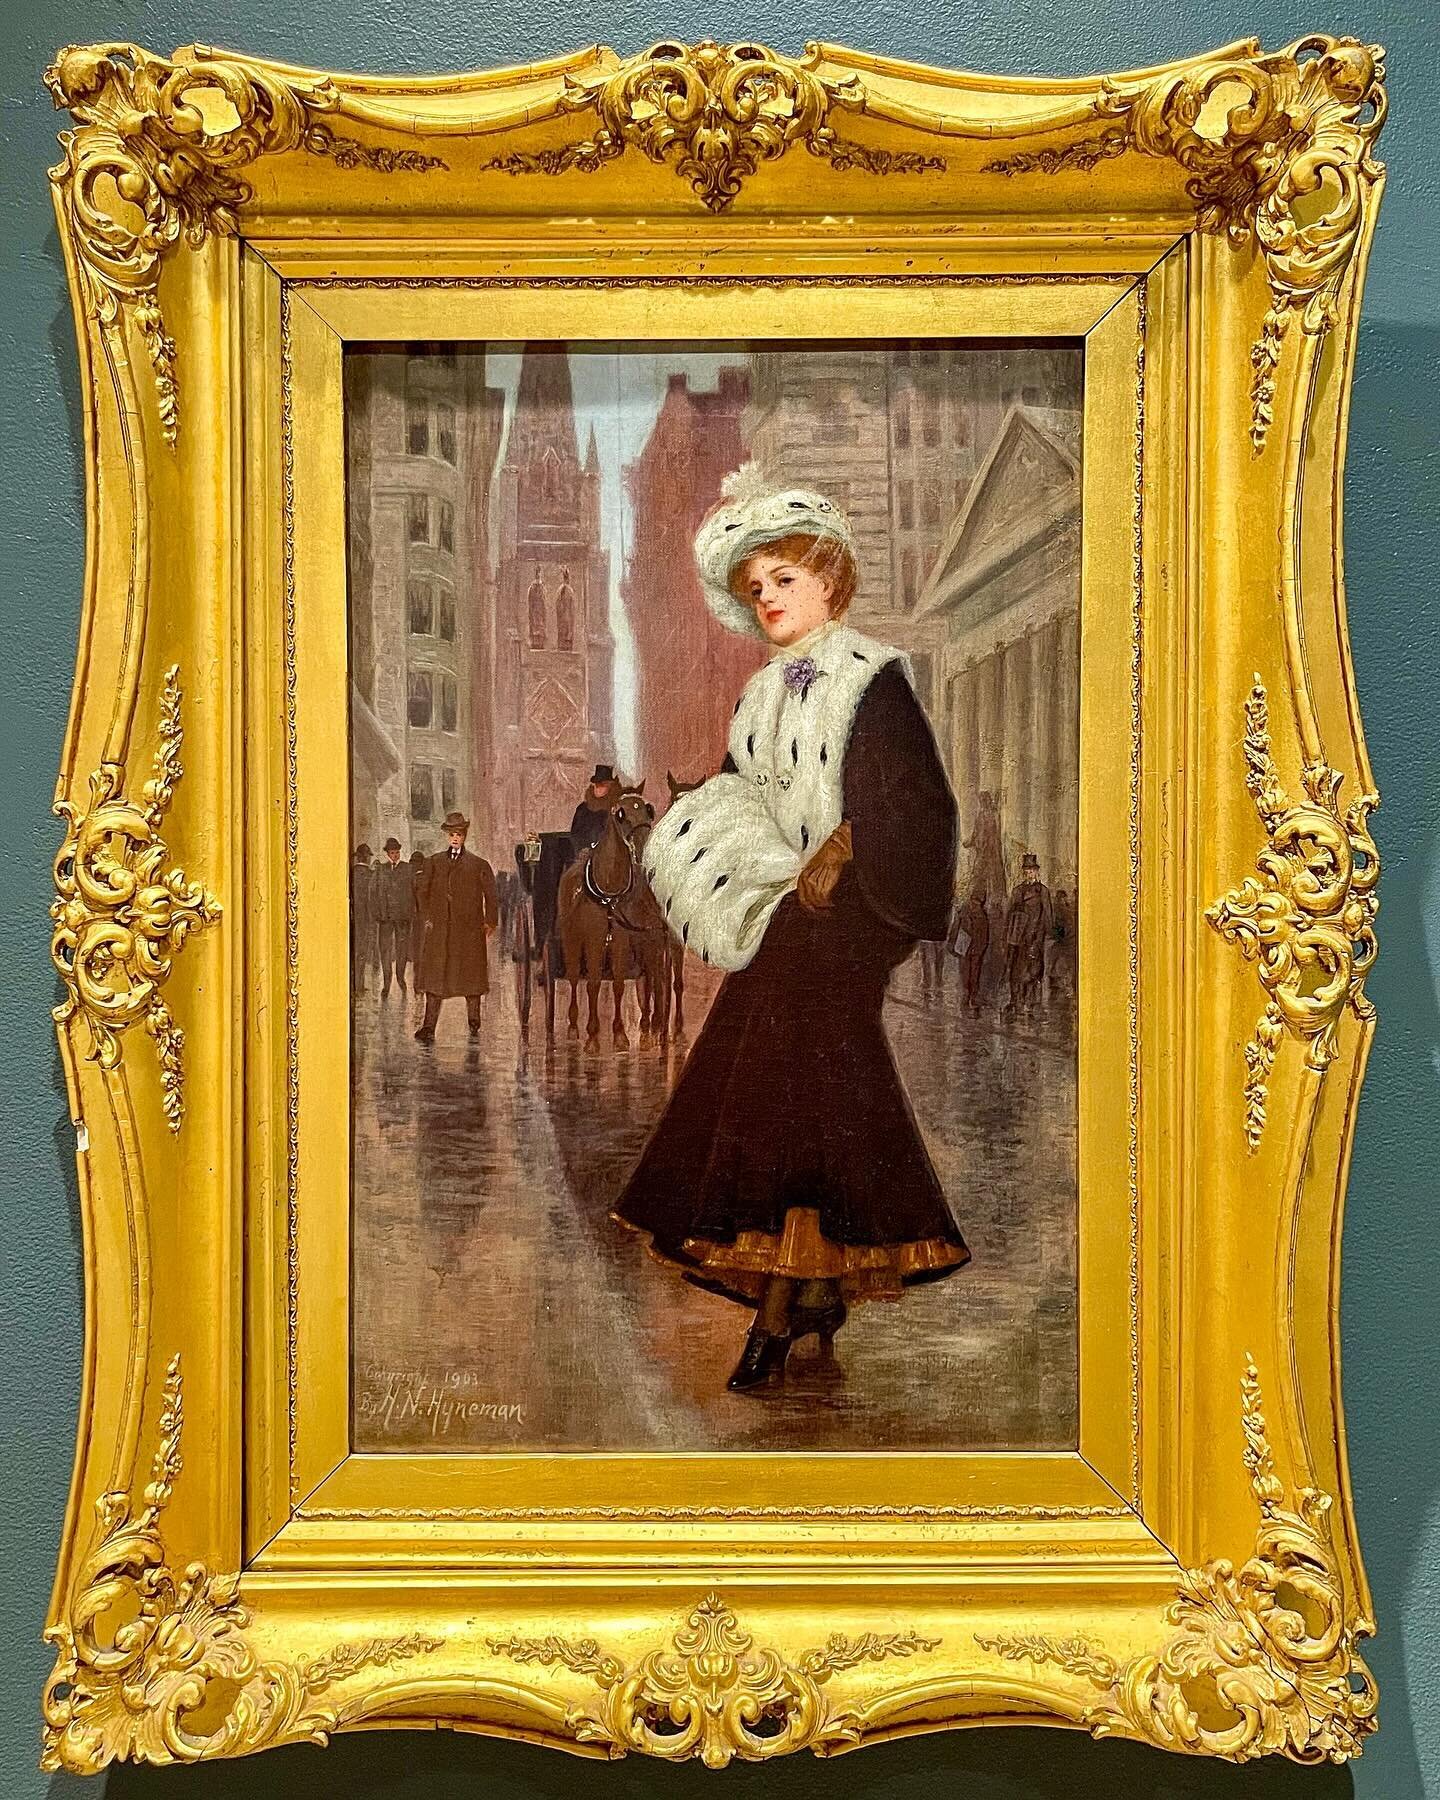 &ldquo;A Sensation on Wall Street, New York&rdquo; is a 1903 oil-on-canvas painting by Herman N. Hyneman (1849-1907). I discovered this painting at the &ldquo;Our Gilded Age&rdquo; exhibit at the Nassau County Museum of Art on Long Island.
**********